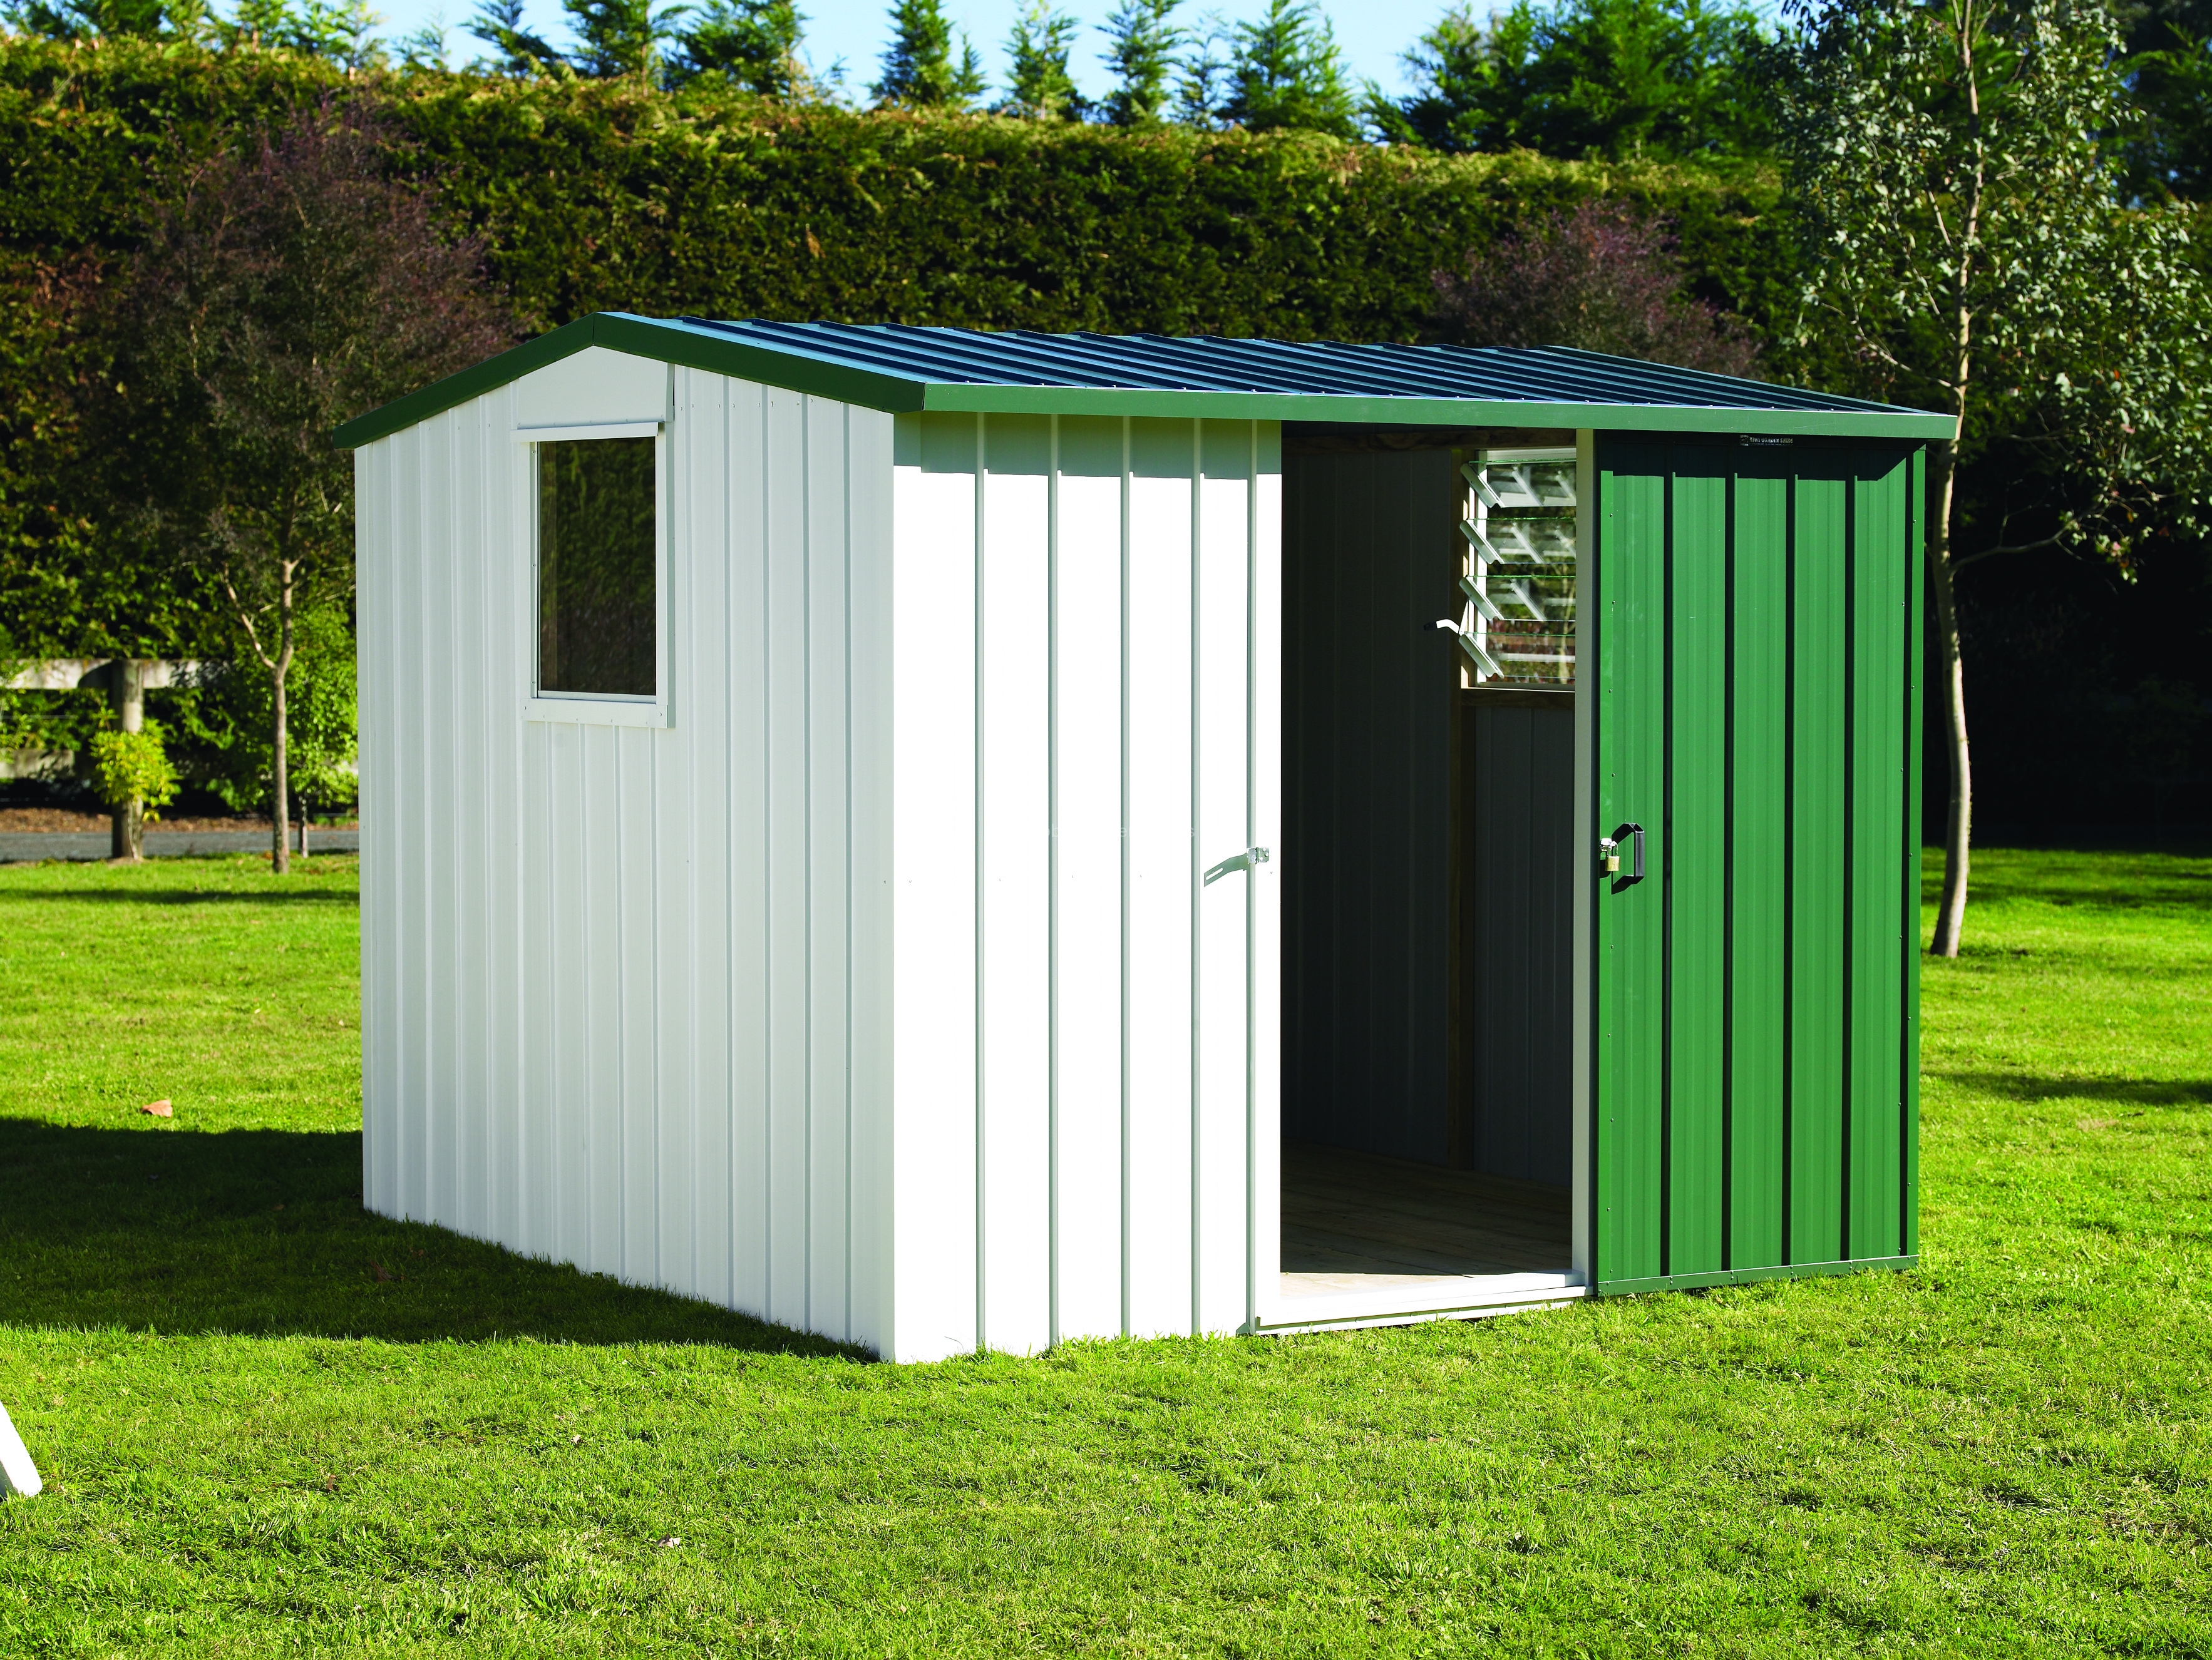 Garden Shed Auckland - Garden Shed Pictures New Zeland